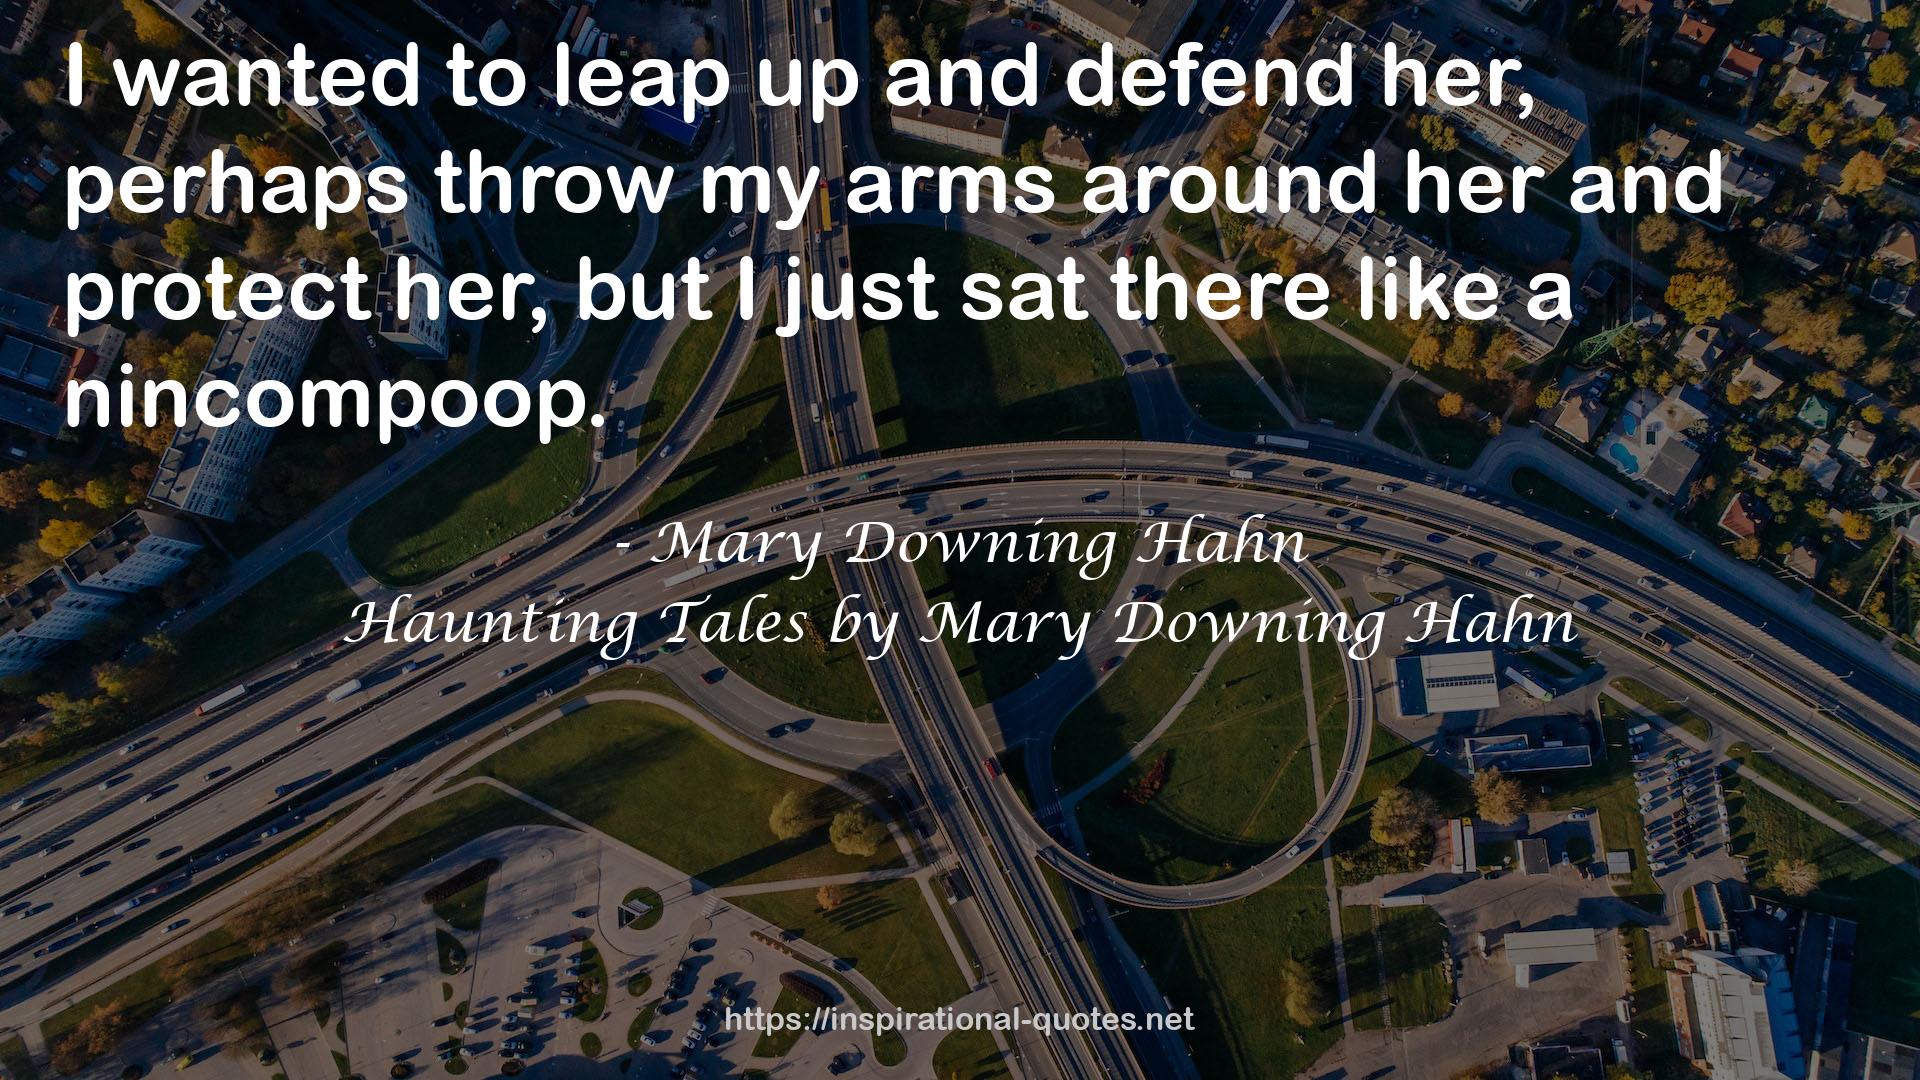 Haunting Tales by Mary Downing Hahn QUOTES